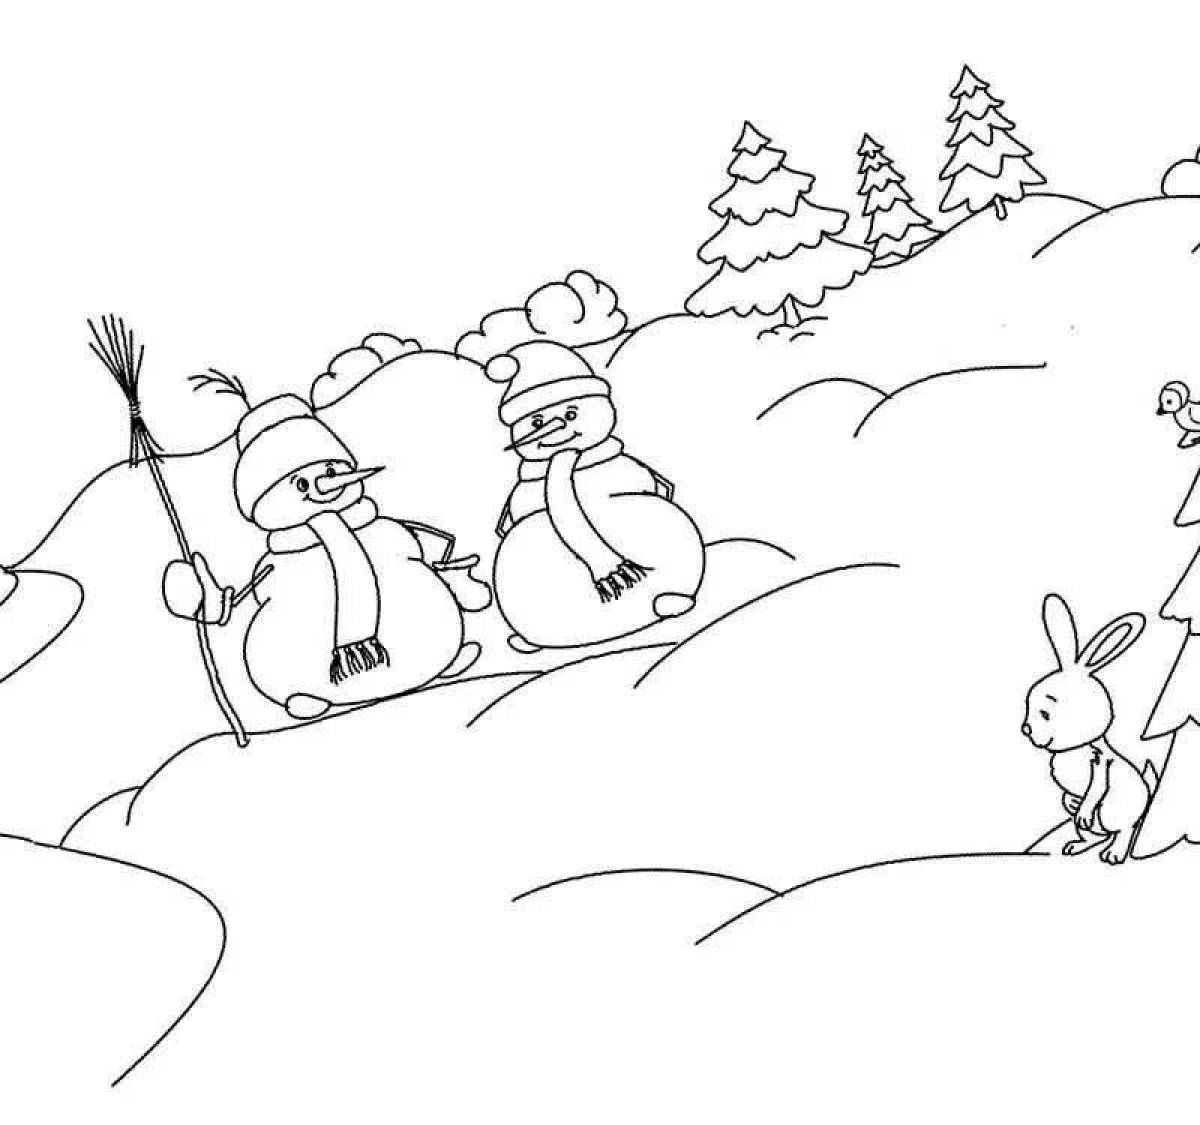 Coloring page magic hare and snowman